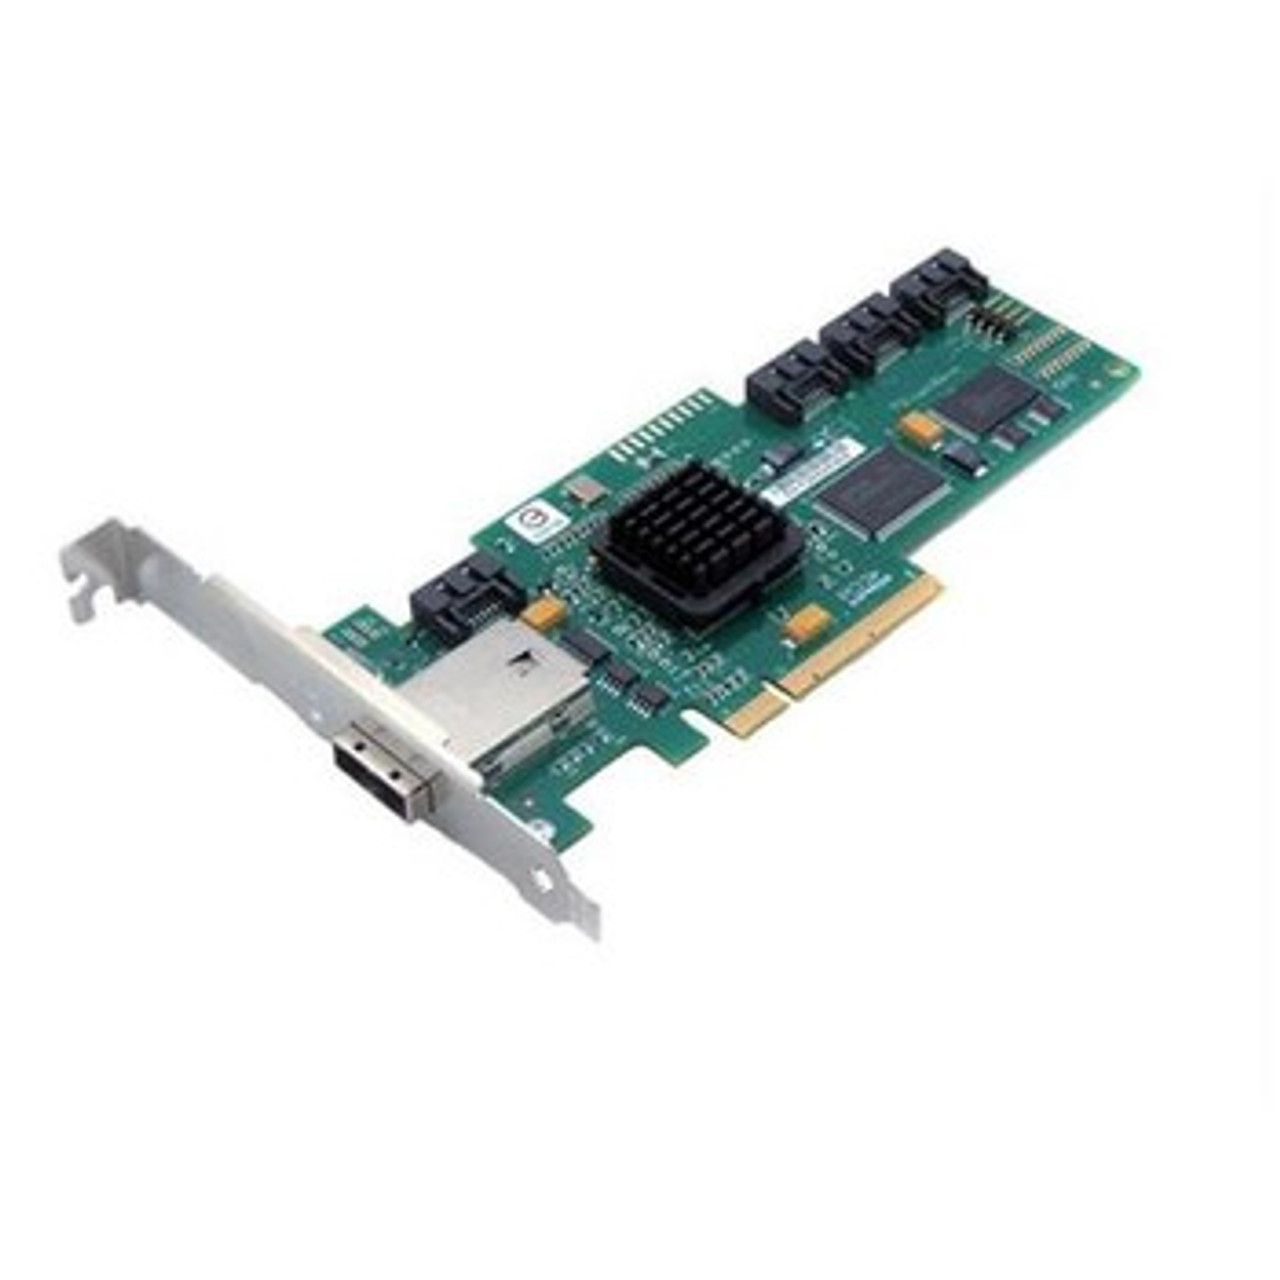 01-01006-01 | Lsi | Pci Dual Channel Differential Controller